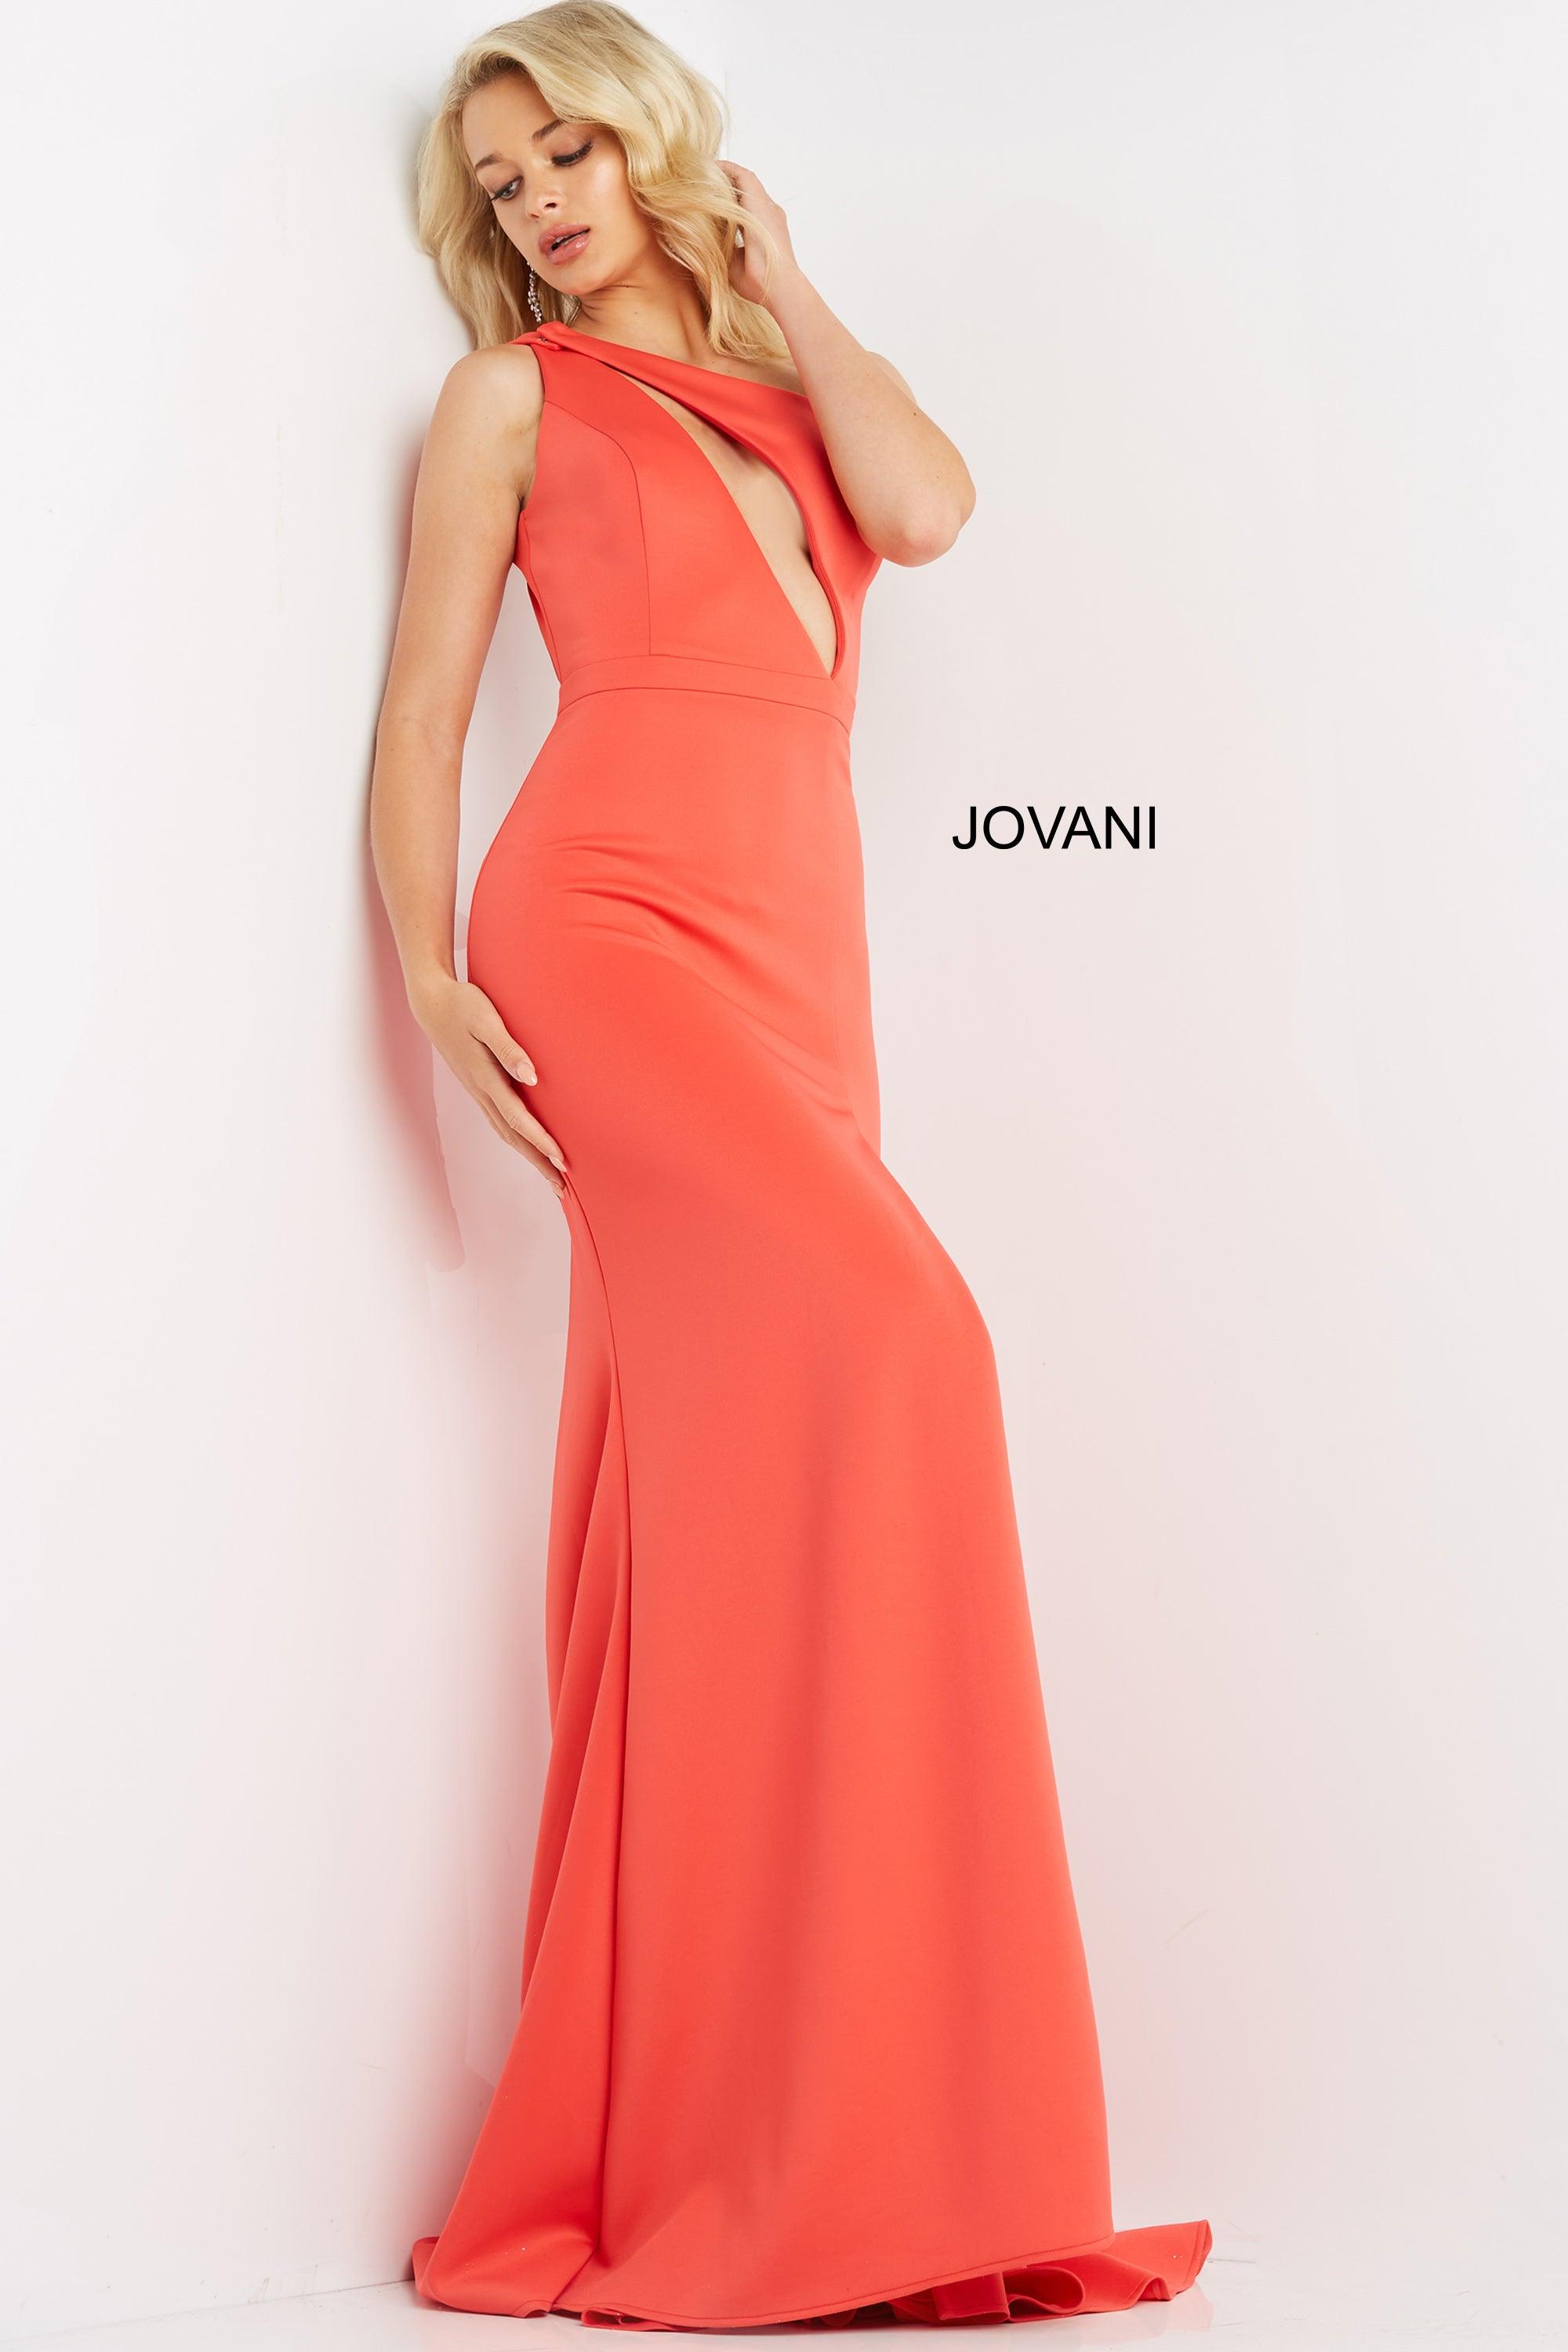 Jovani One Shoulder Long Fitted Gown 06702 - The Dress Outlet